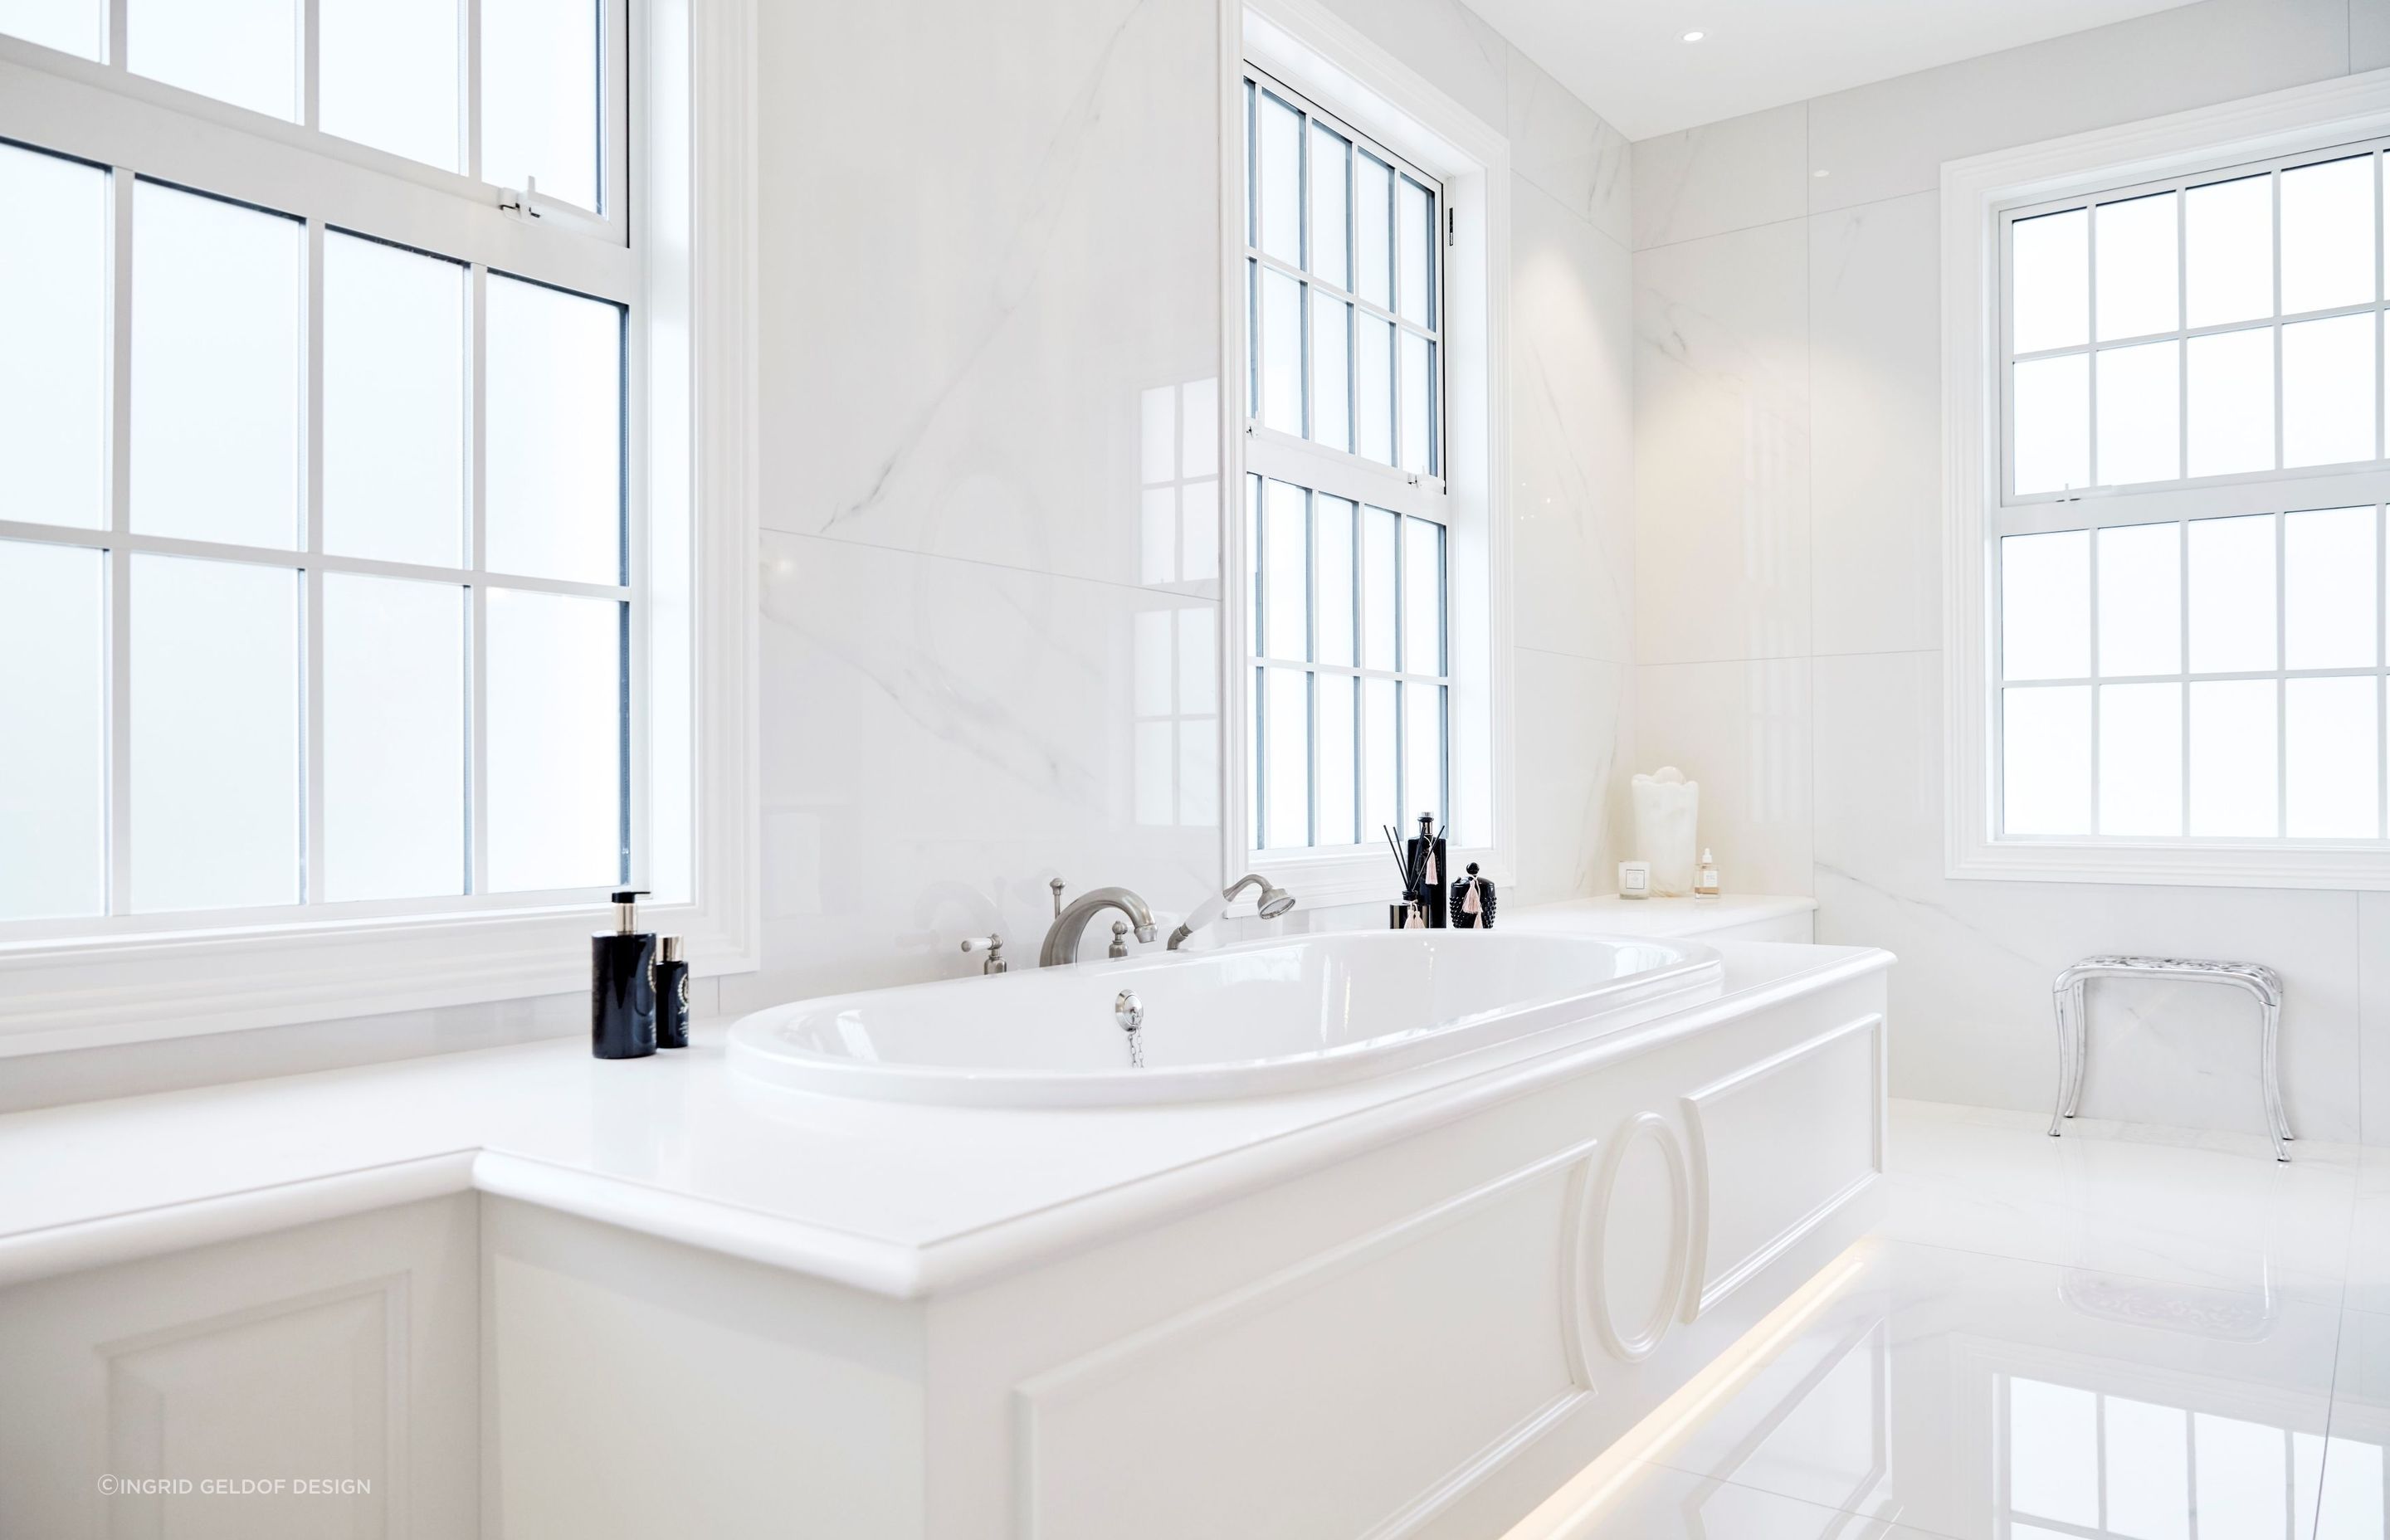 One of the most luxurious bathrooms featured, thanks to the refined use of white natural stone tiling.